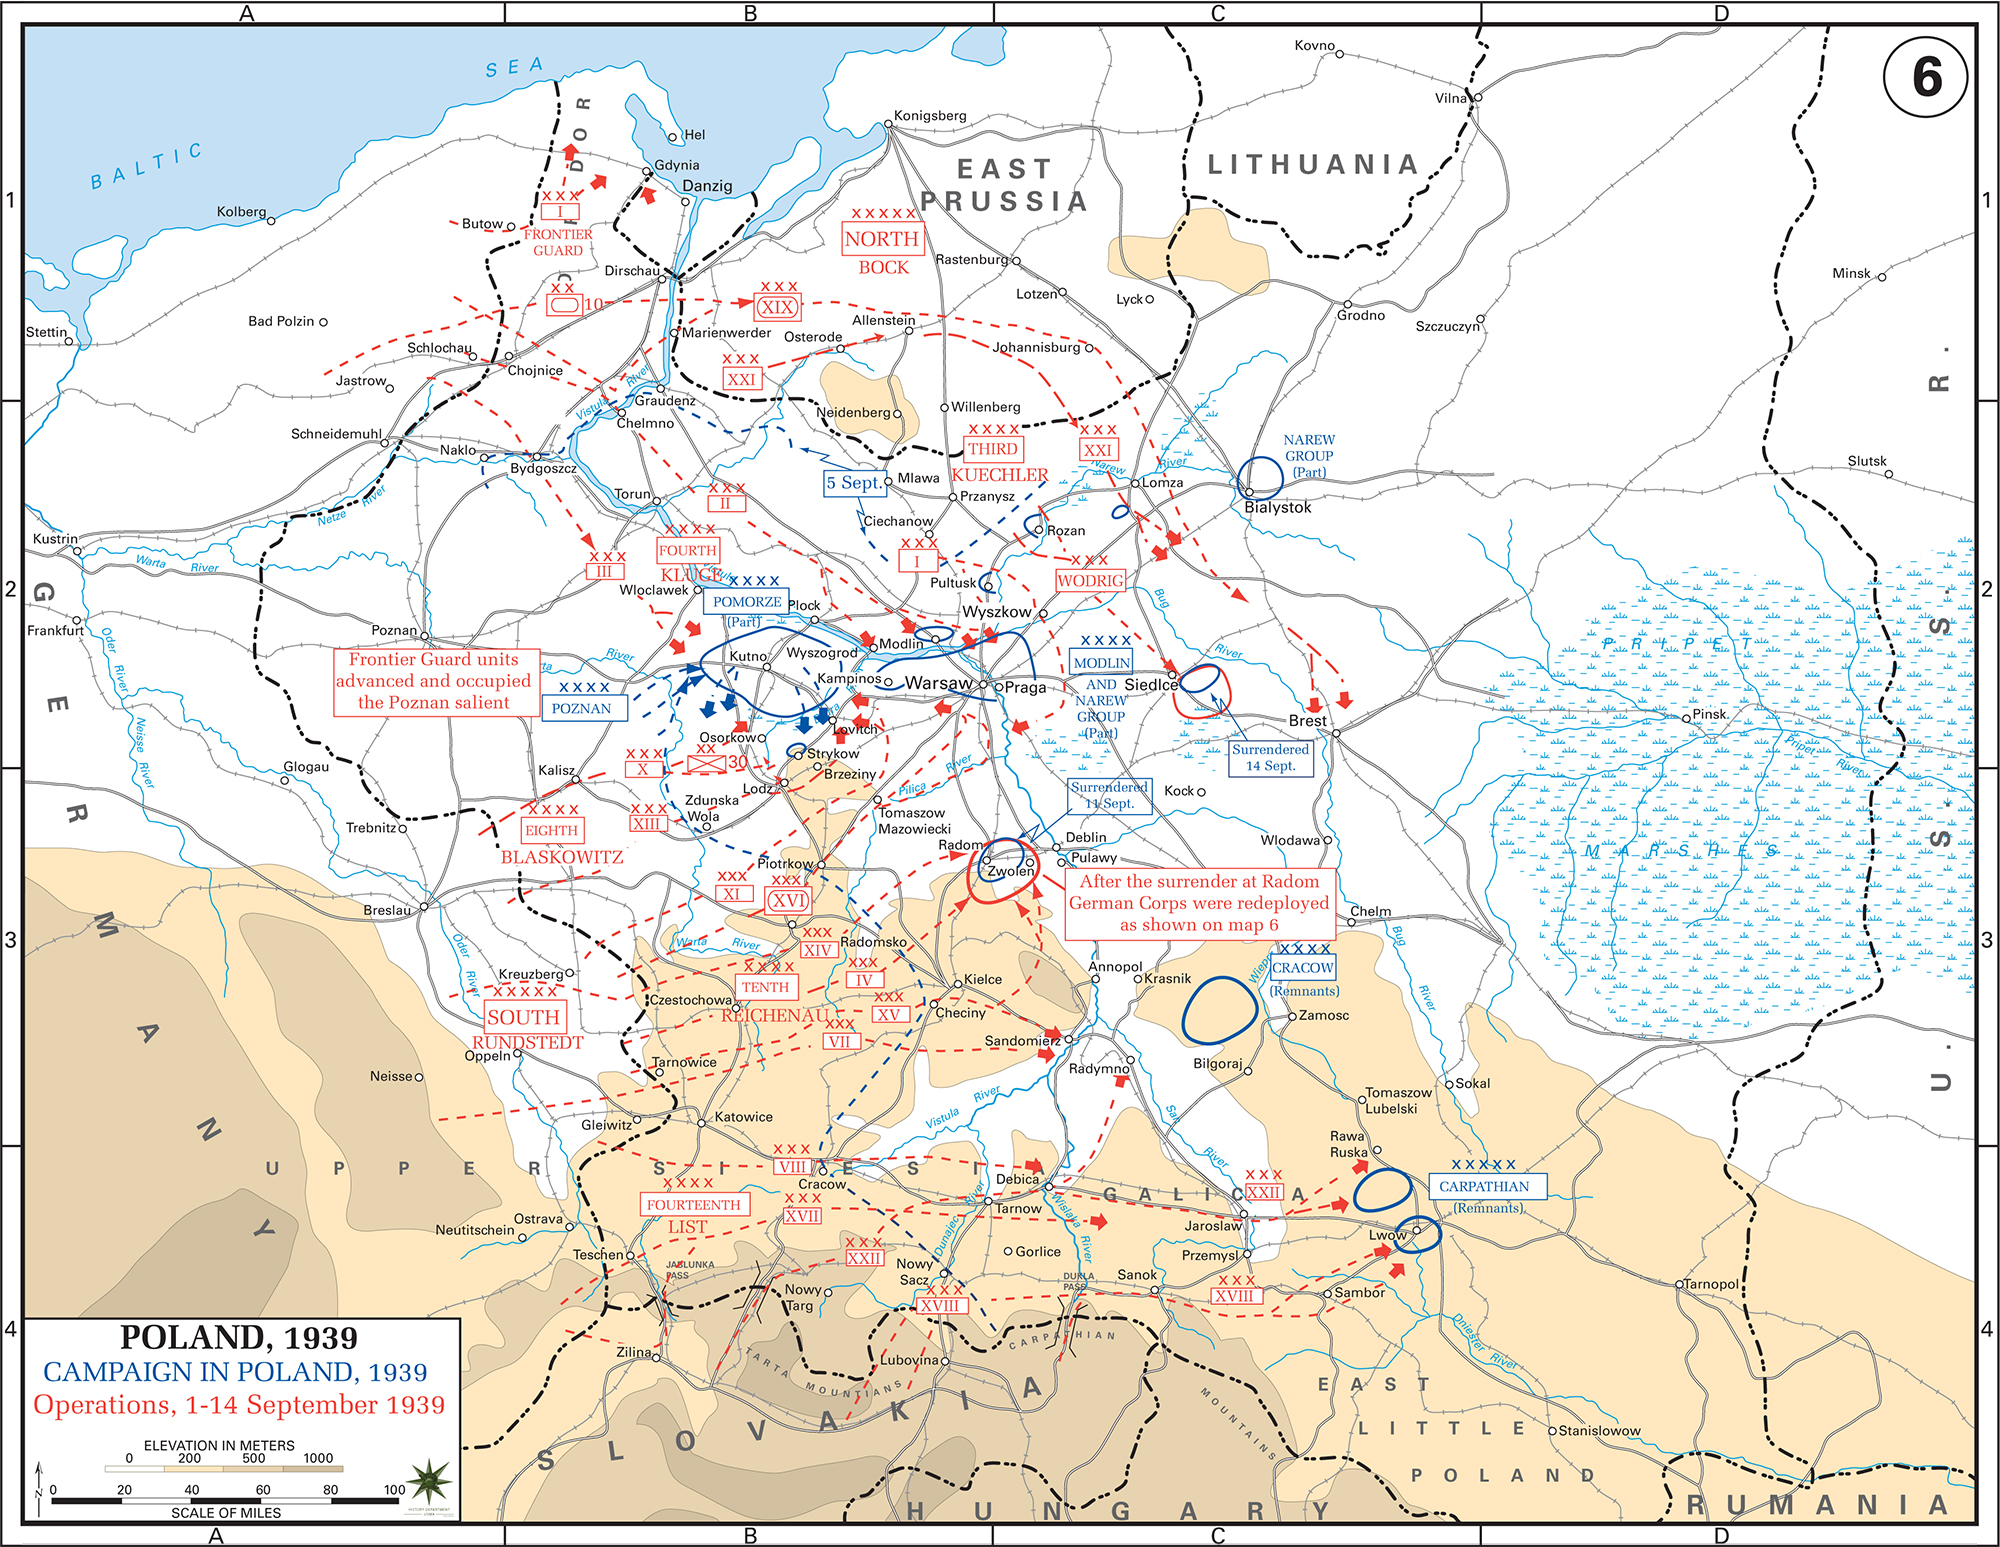 History Map of WWII: Poland 1939 Operations September 1-14, 1939